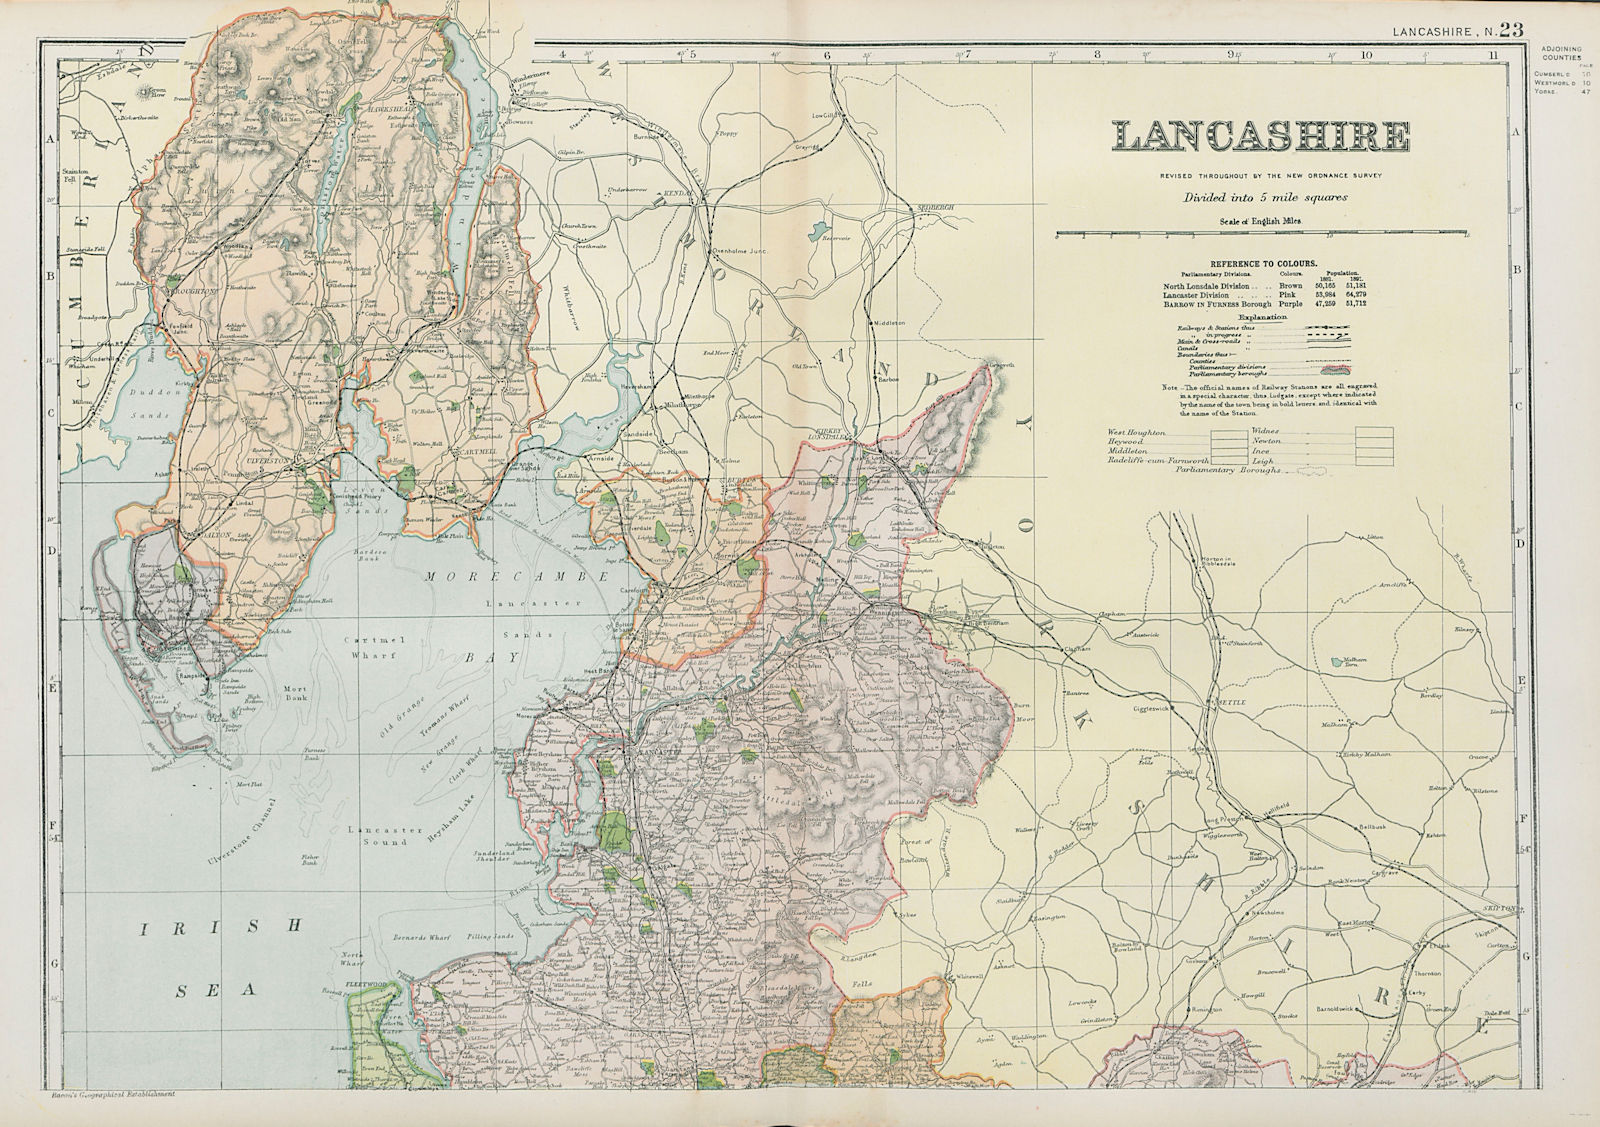 Associate Product LANCASHIRE (NORTH) . Showing Parliamentary divisions & parks. BACON 1900 map